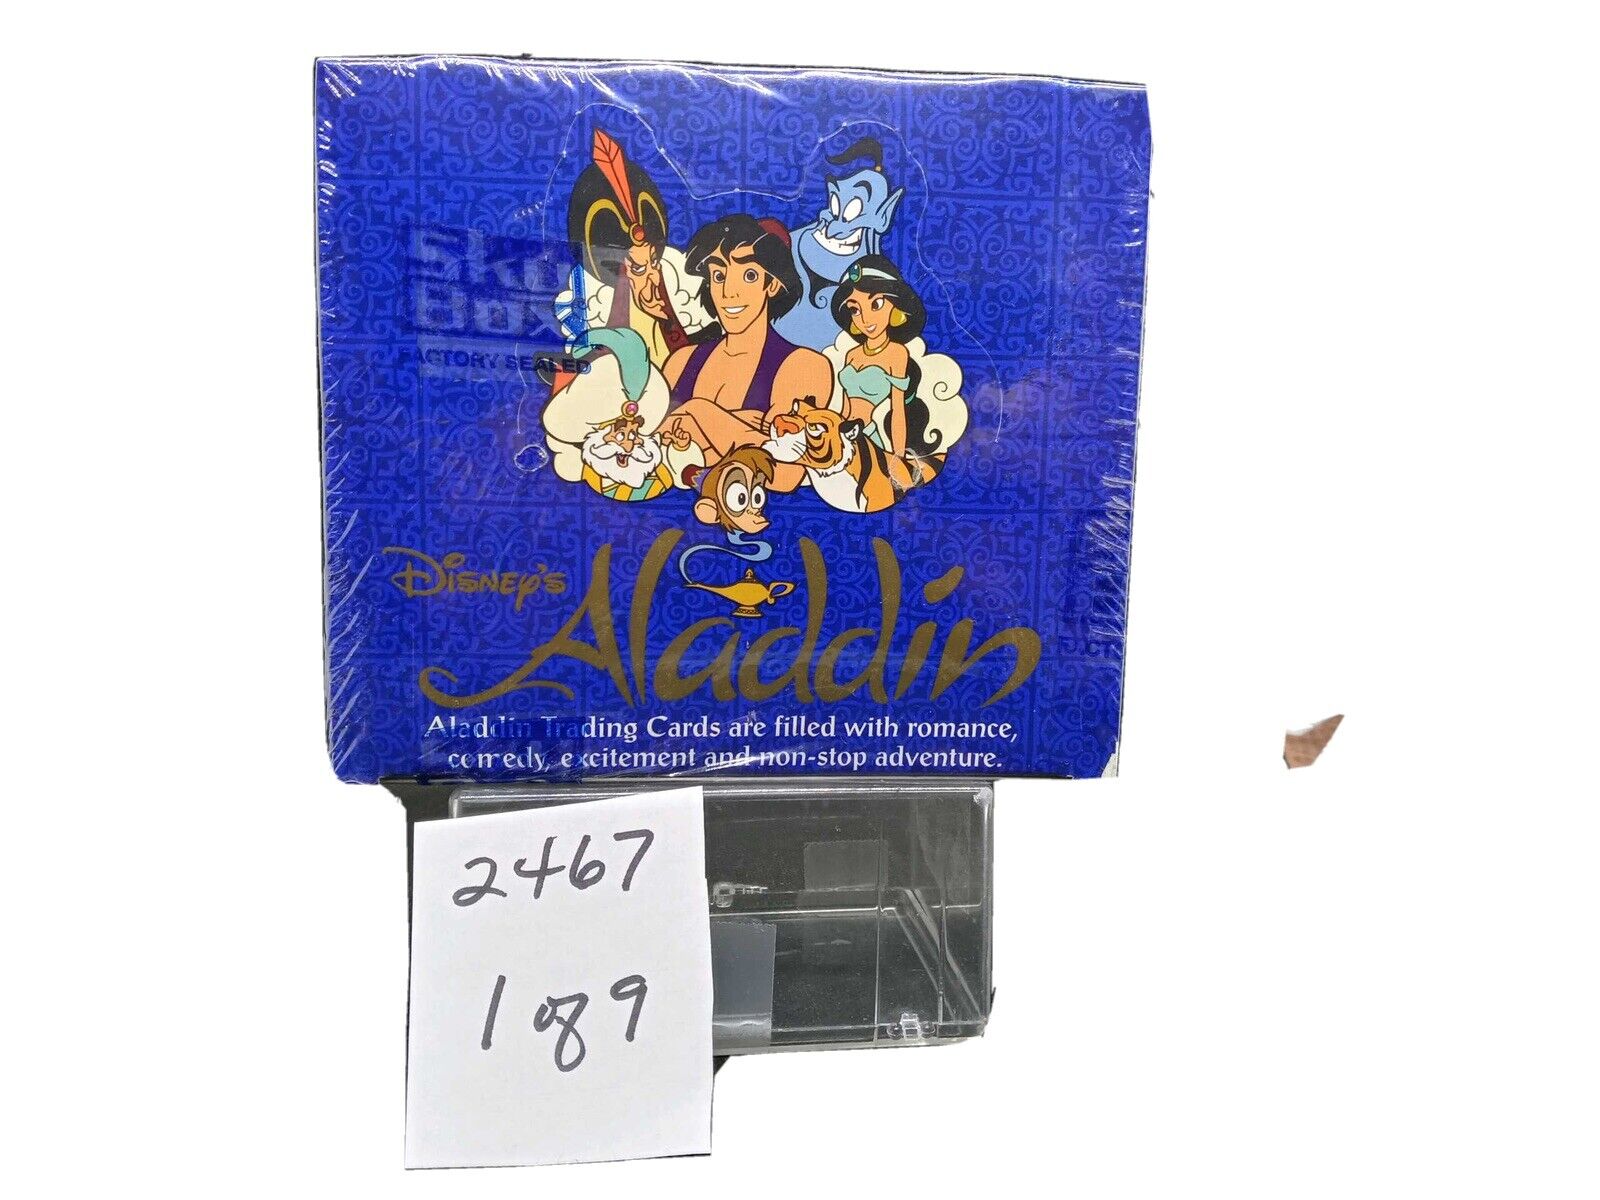 1993 Aladdin Trading Cards Sealed Booster Box 36 Sealed 8 Card packs Skybox